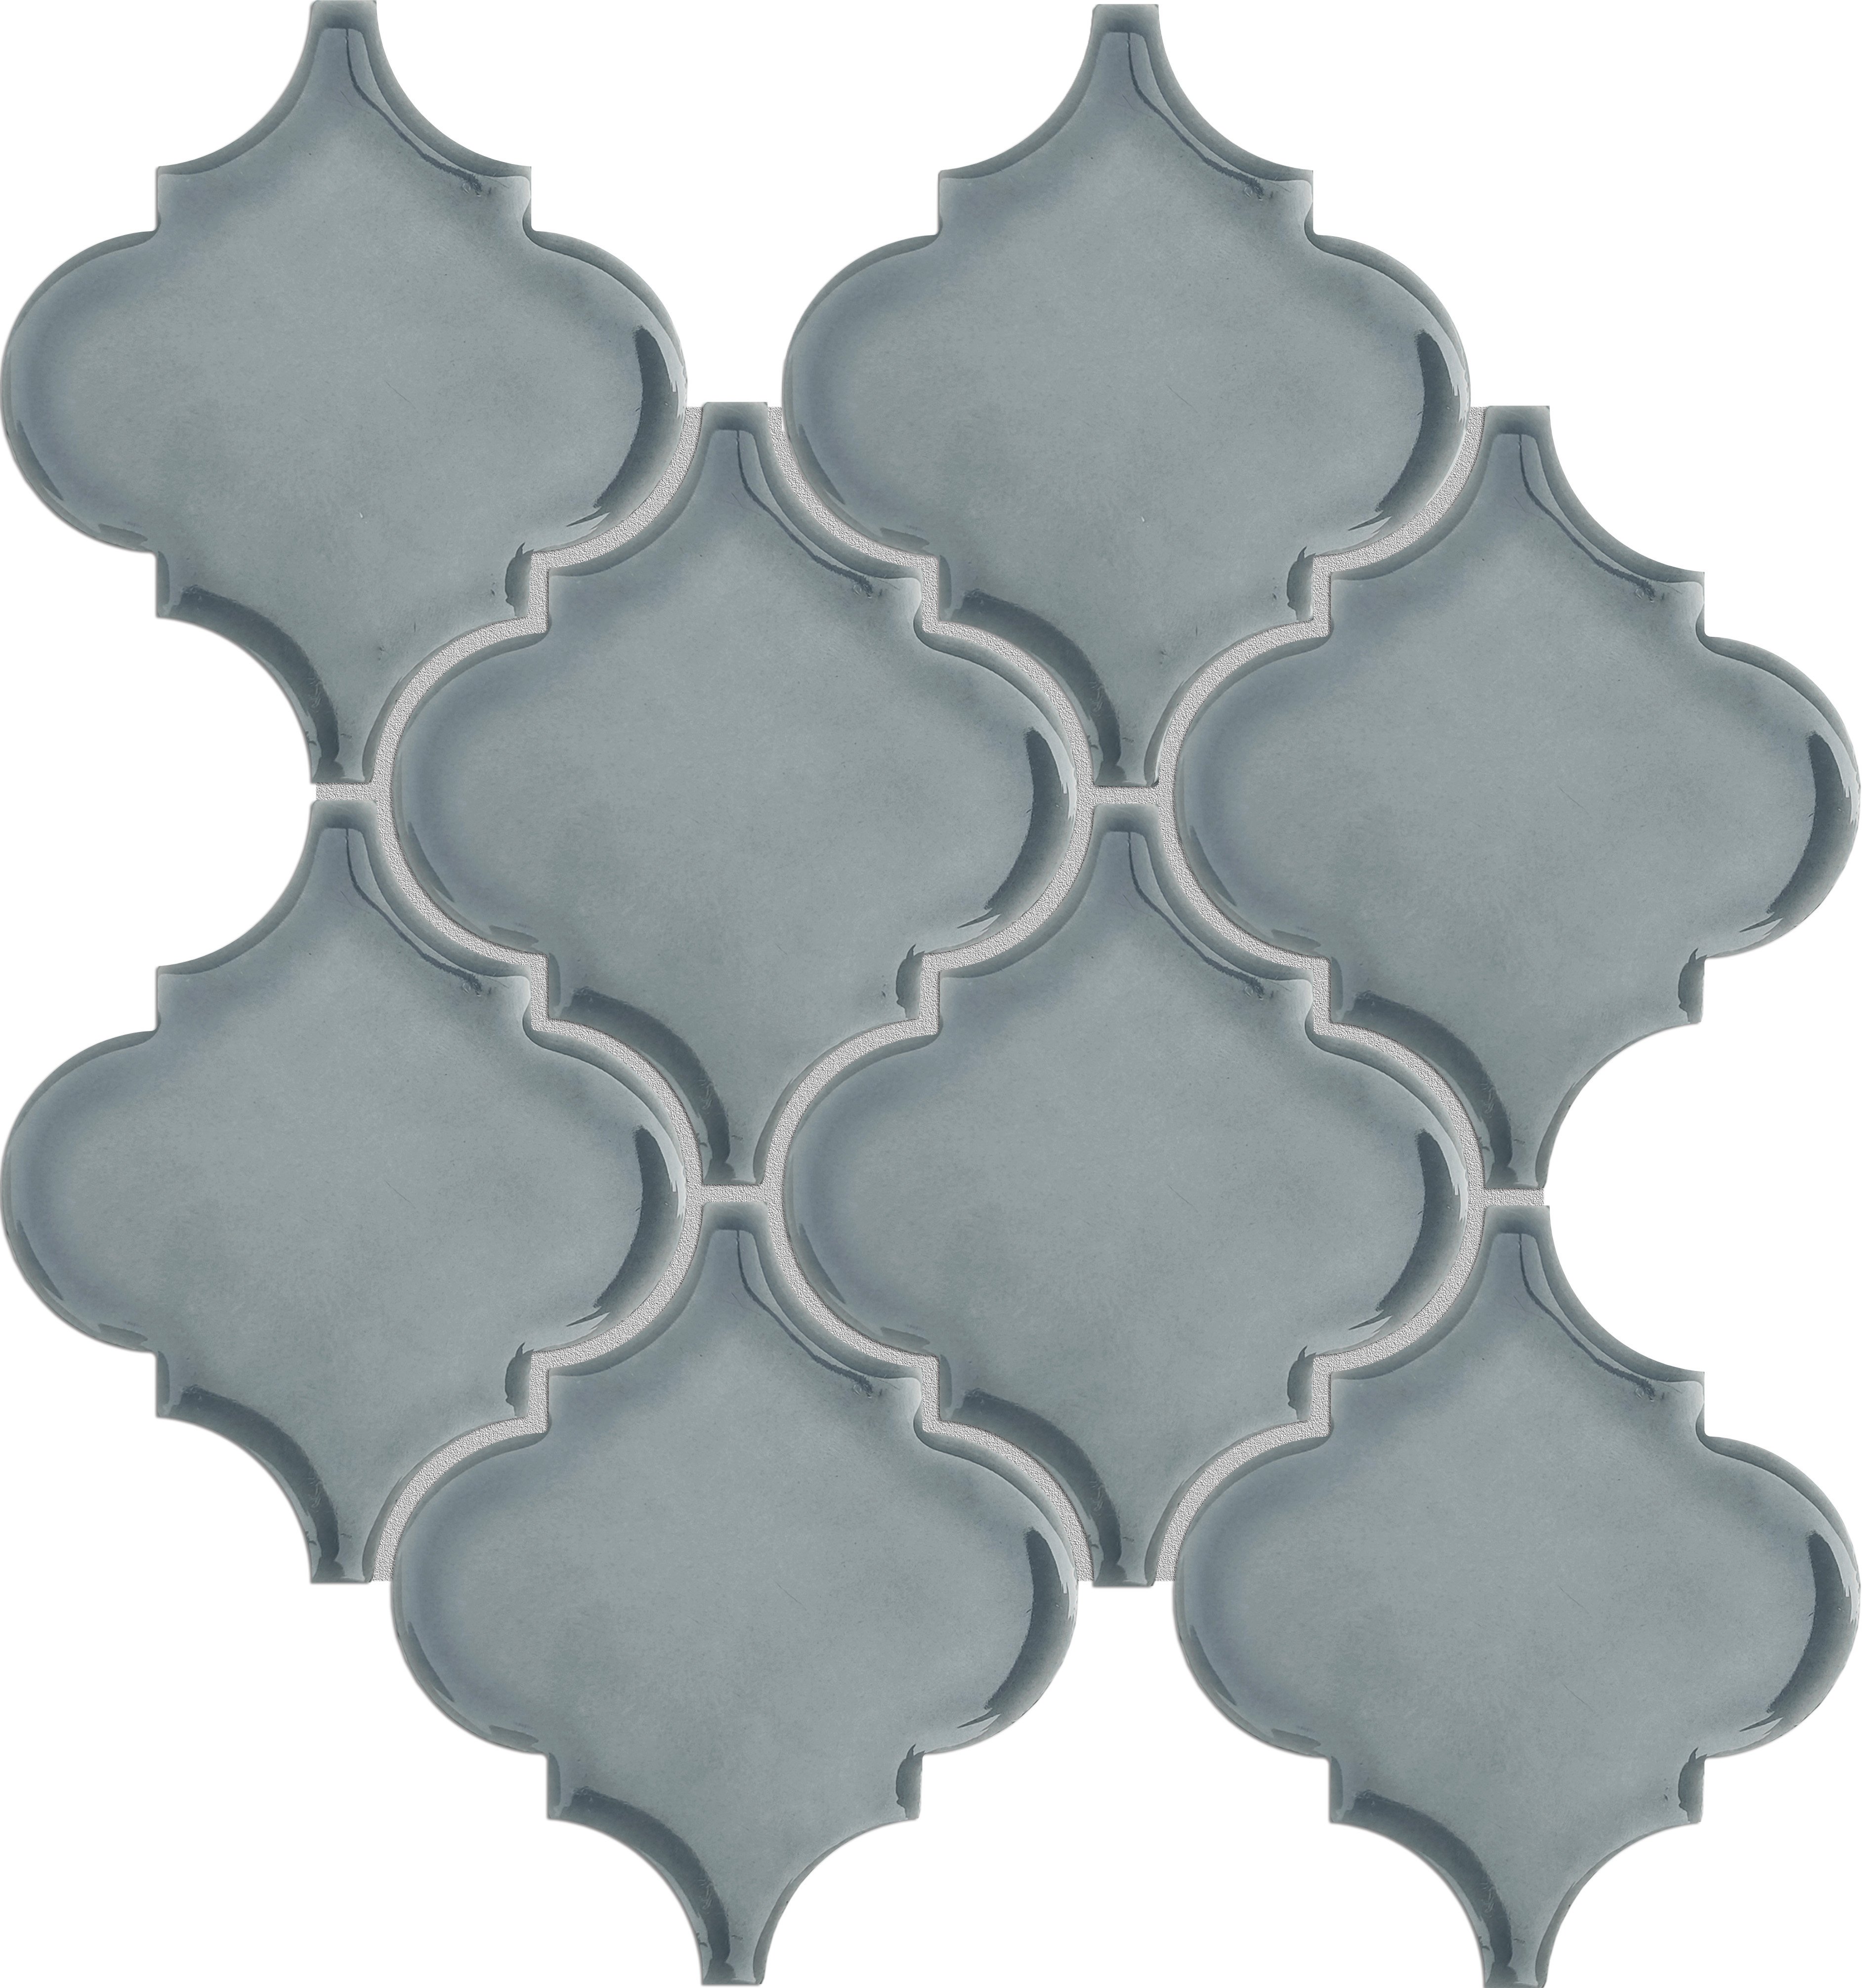 Emser MOROCCO Dove Arabesque glazed ceramic mosaic tile 10x11 wall tile  W94MOROARDO1011MO is an Emser tile product. Emser MOROCCO mosaic tile is a glazed ceramic tile with an arabesque design and comes in white, silver, fawn, and dove. 